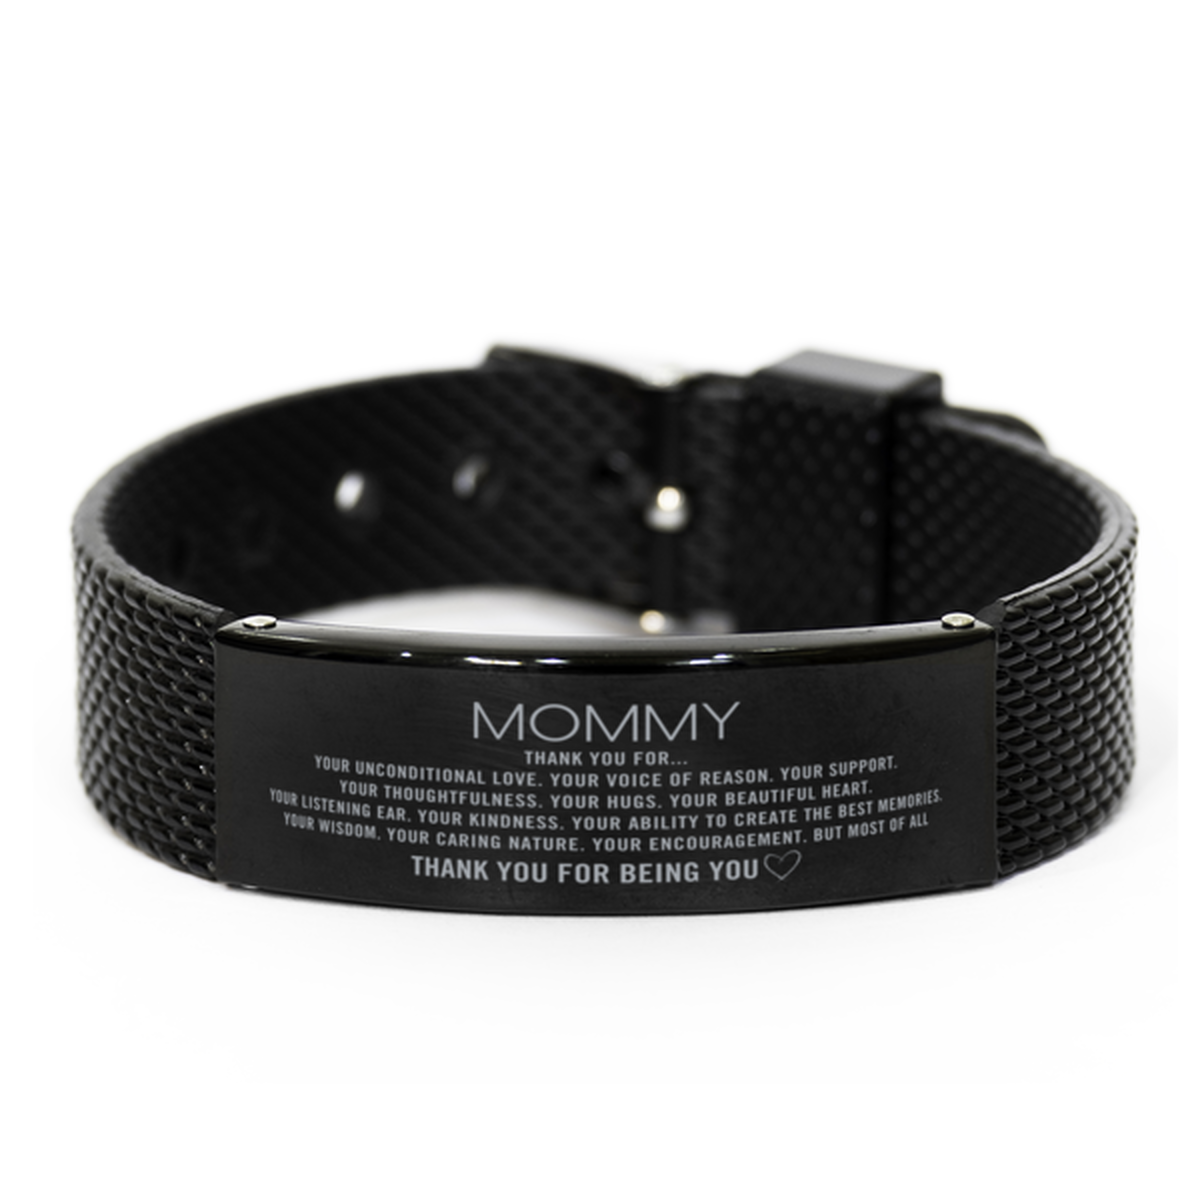 Mommy Black Shark Mesh Bracelet Custom, Engraved Gifts For Mommy Christmas Graduation Birthday Gifts for Men Women Mommy Thank you for Your unconditional love